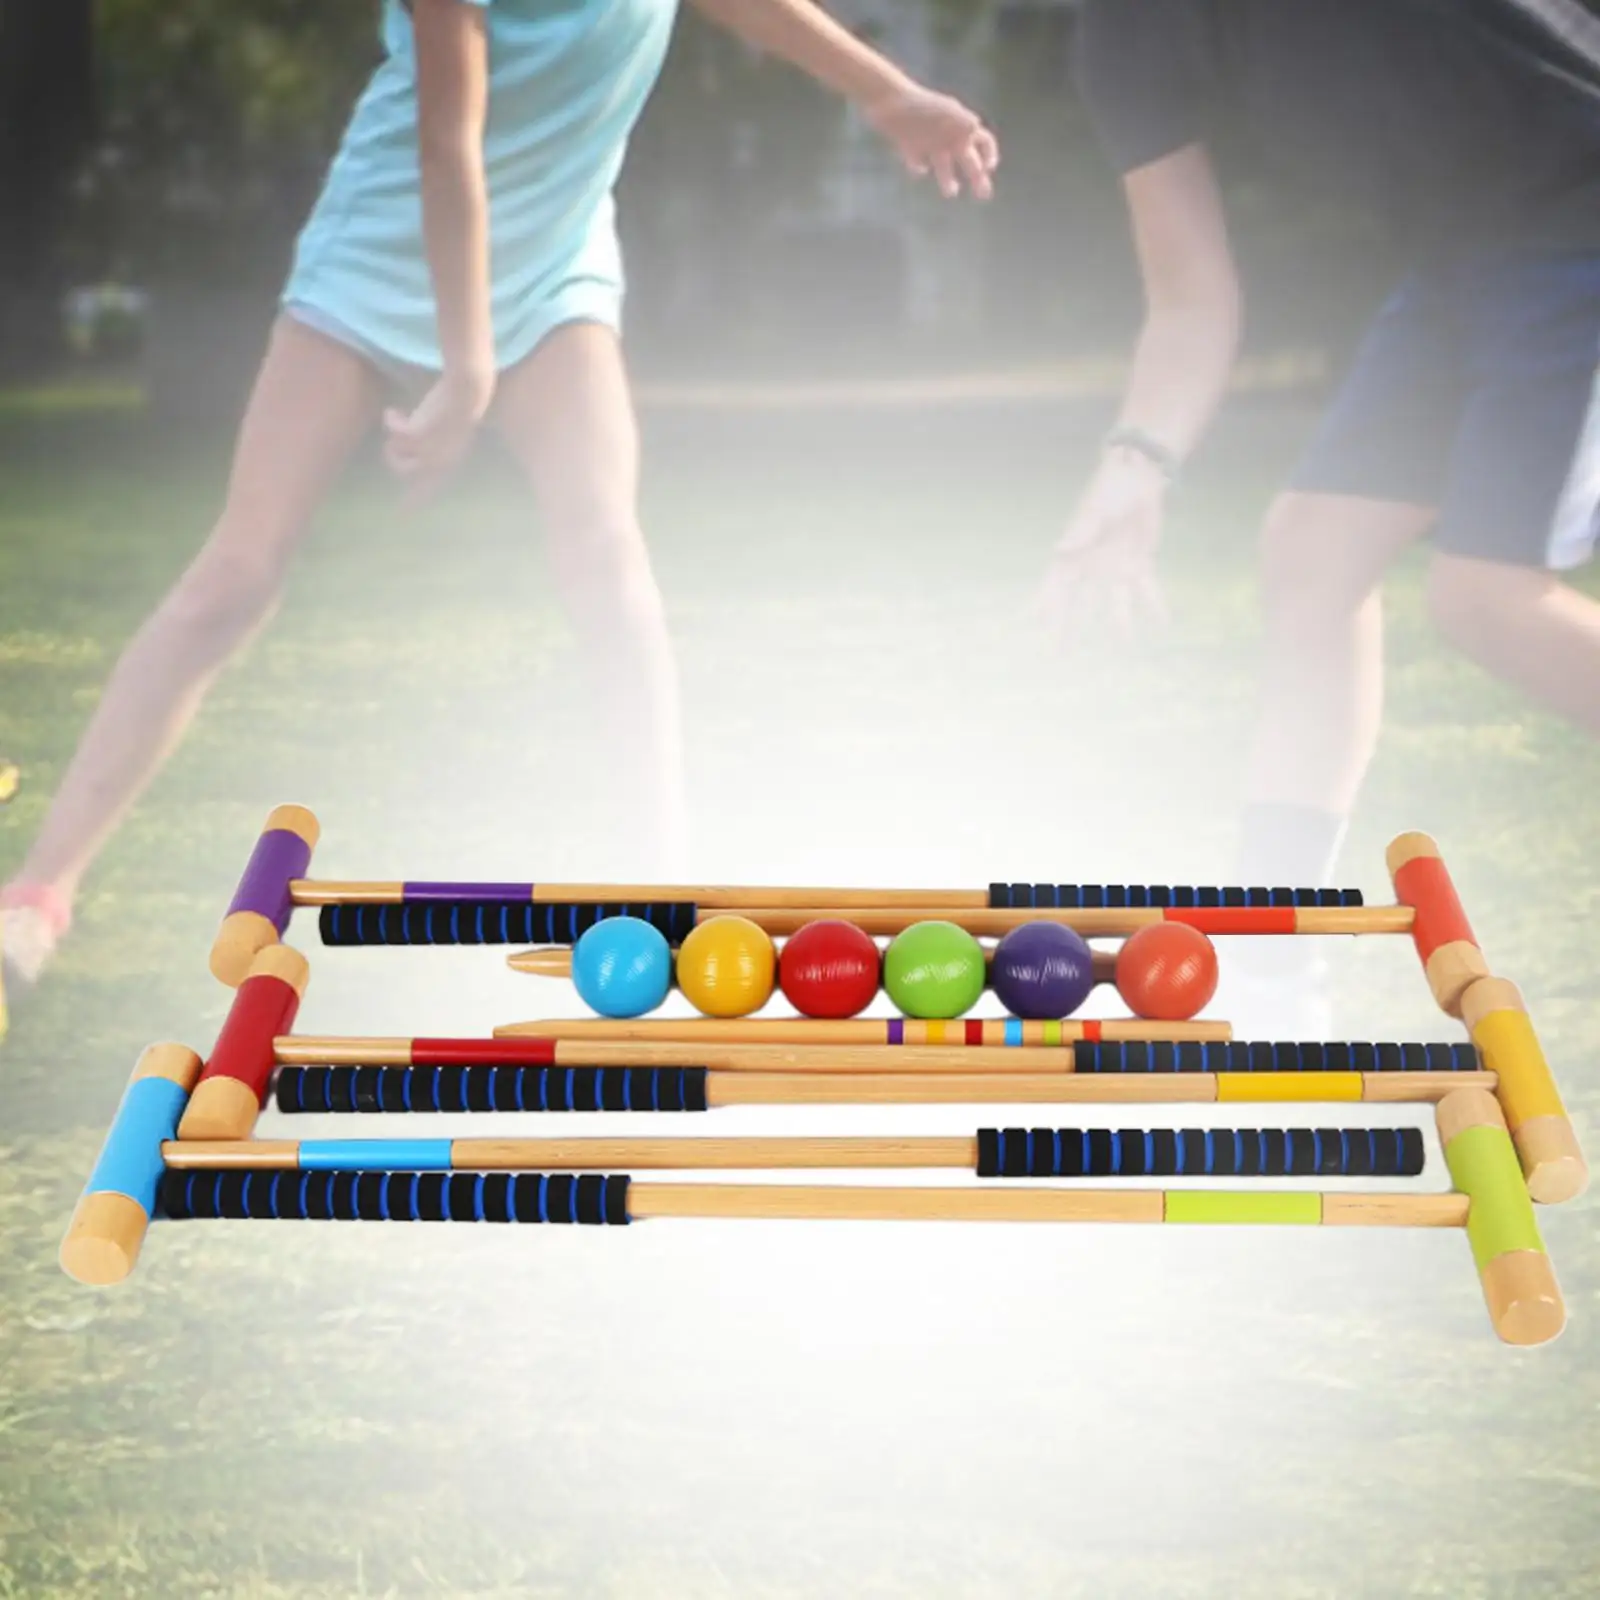 6Pcs 1 Set for 6 Players Colored Balls Carrying Bag with Wooden Mallets Diameter 7.5cm Croquet for Lawn Outdoor Toys Backyard